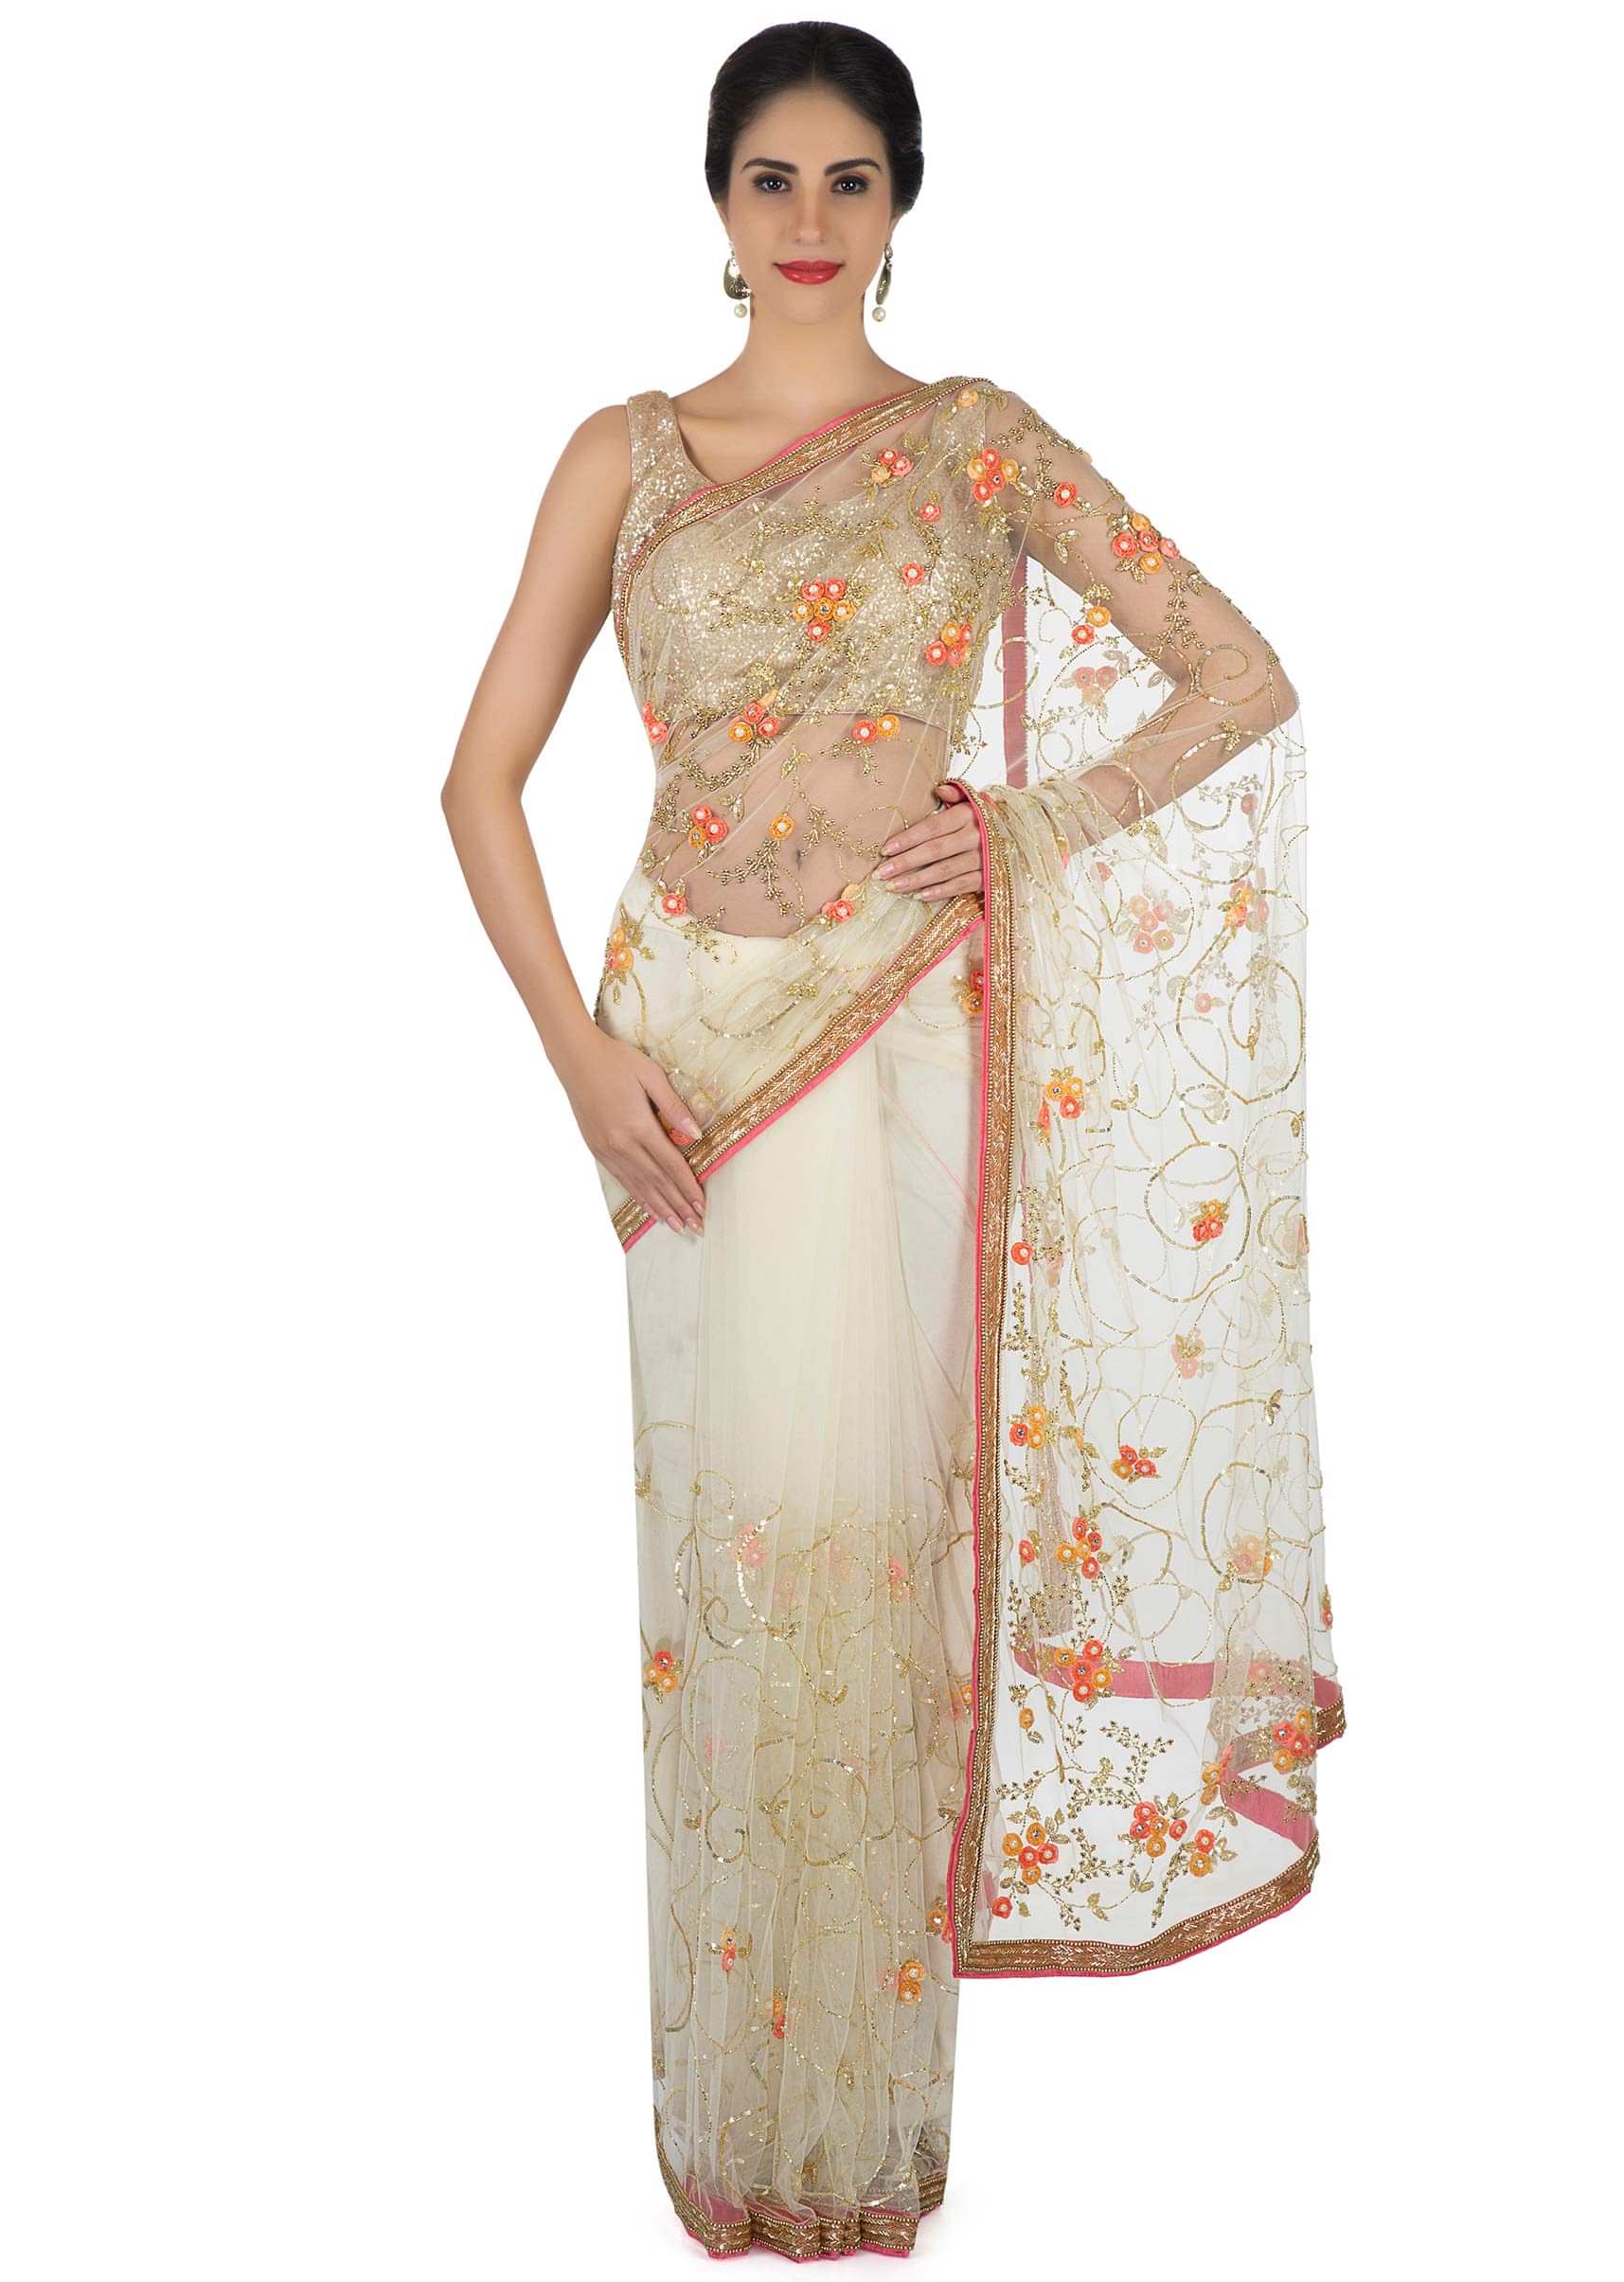 Saree in snow white with 3D flower embroidery jaal only on Kalki